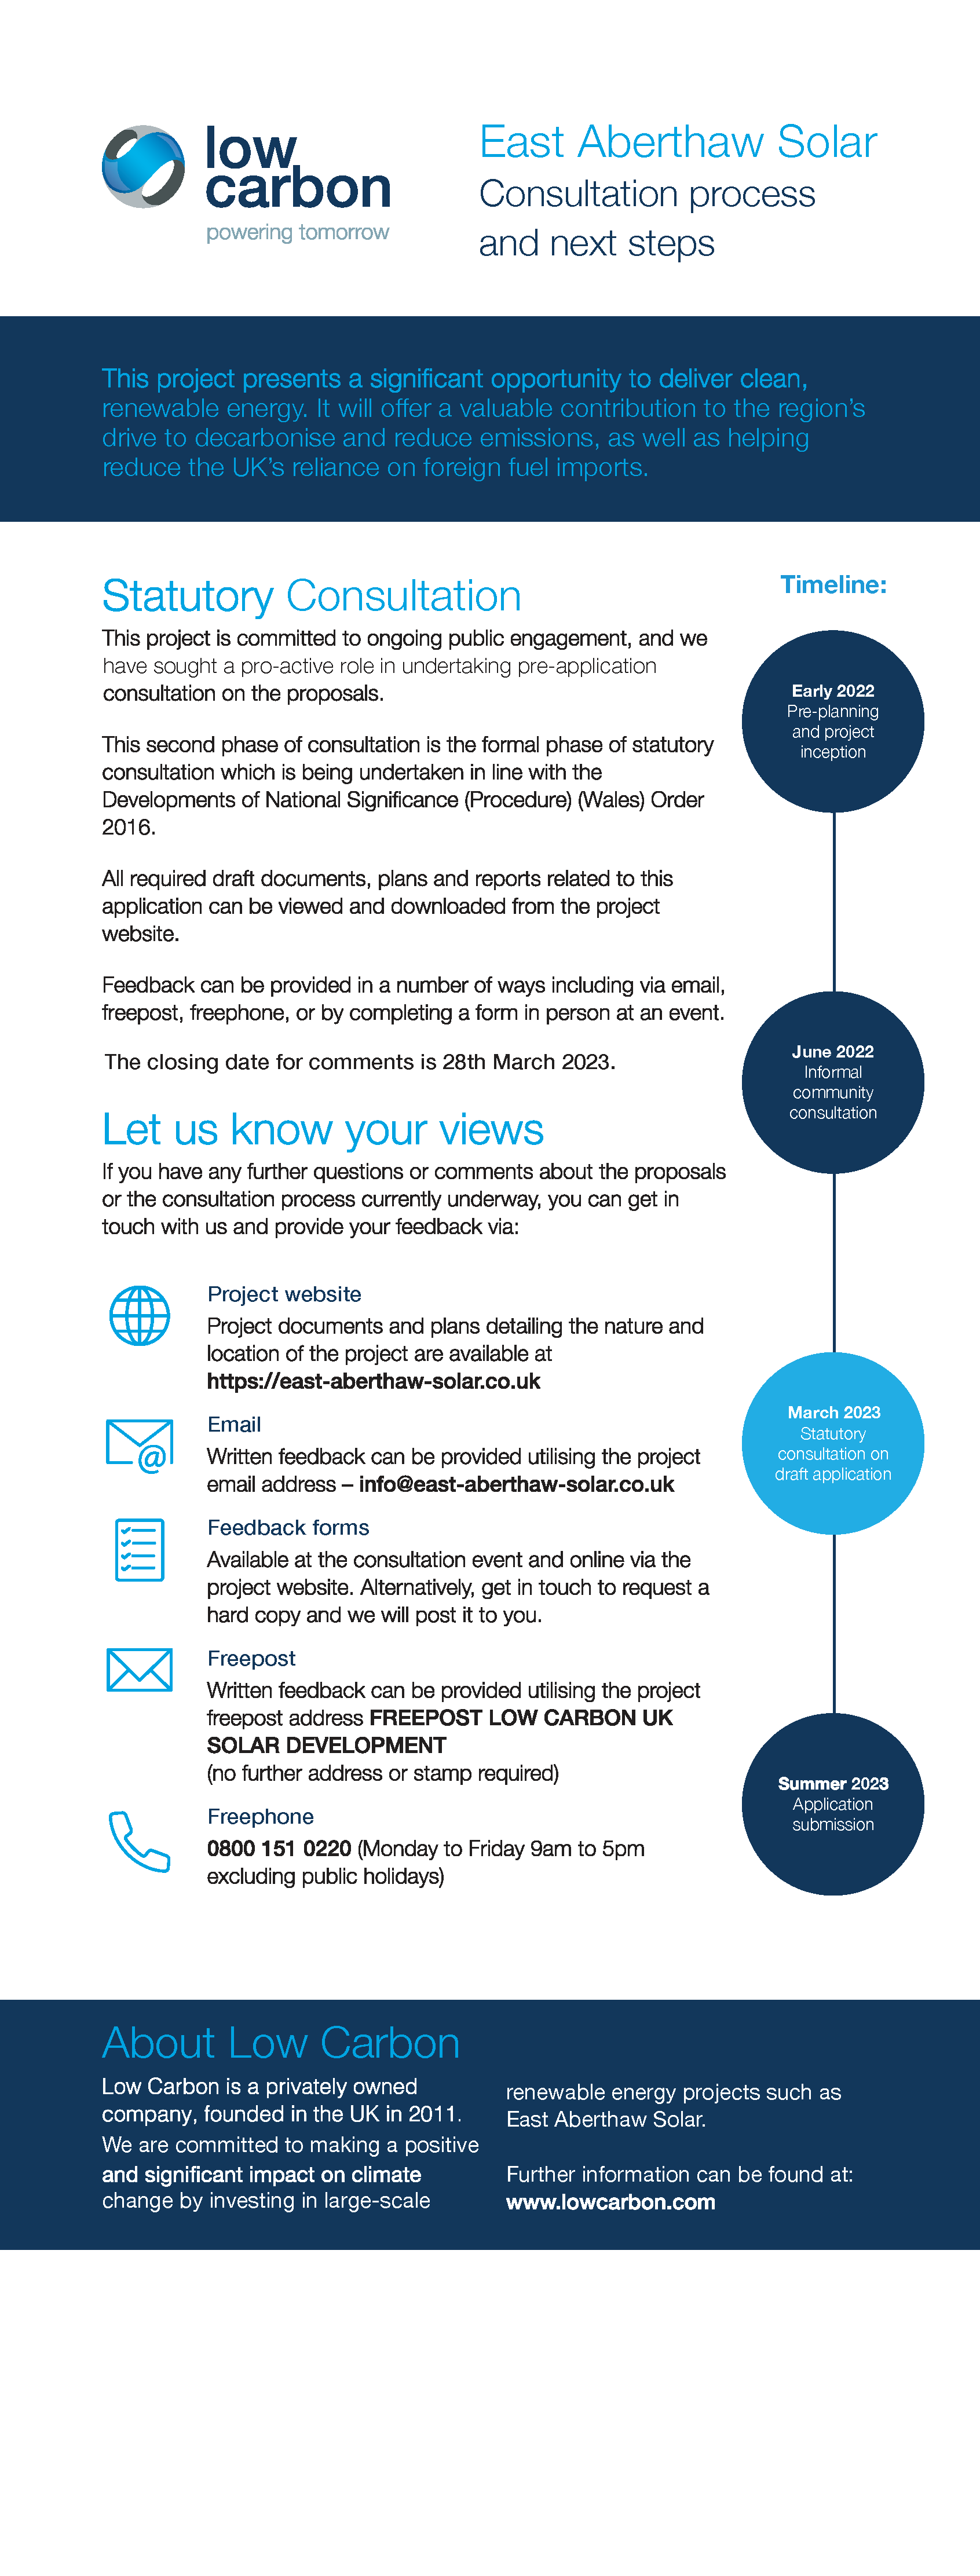 Consultation process and next steps